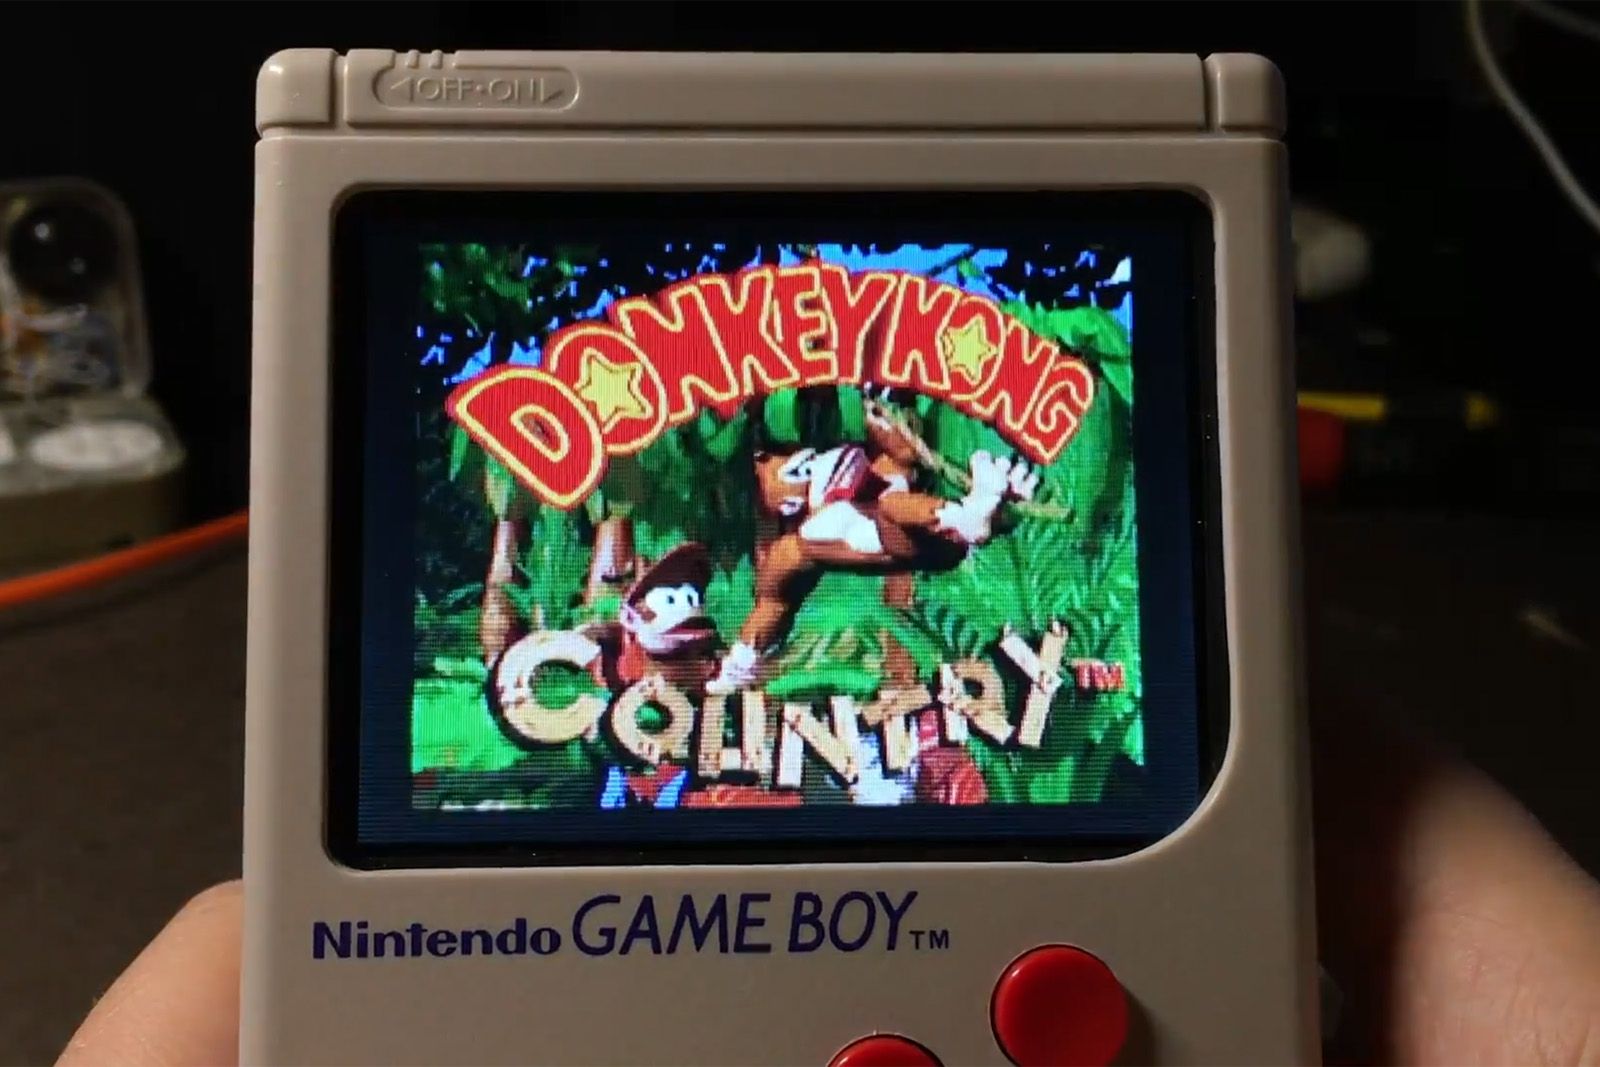 you can play old snes games on an original game boy thanks to raspberry pi image 1